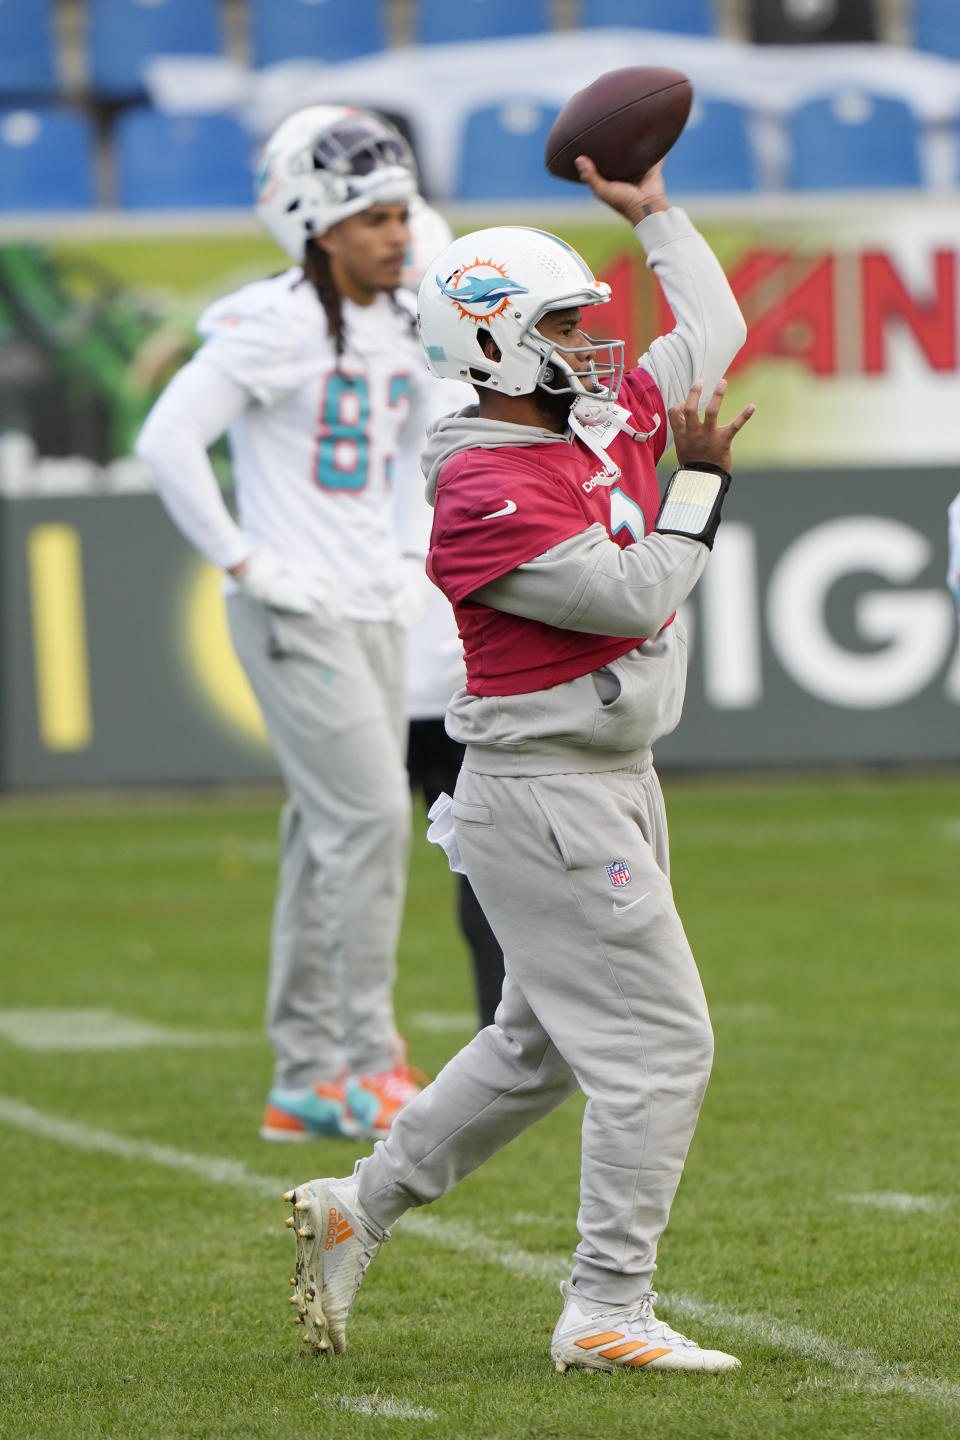 Miami Dolphins quarterback Tua Tagovailoa (1) throws the ball during a practice session in Frankfurt, Germany, Friday, Nov. 3, 2023. The Miami Dolphins are set to play the Kansas City Chiefs in a regular season NFL game in Frankfurt on Sunday. (AP Photo/Doug Benc)